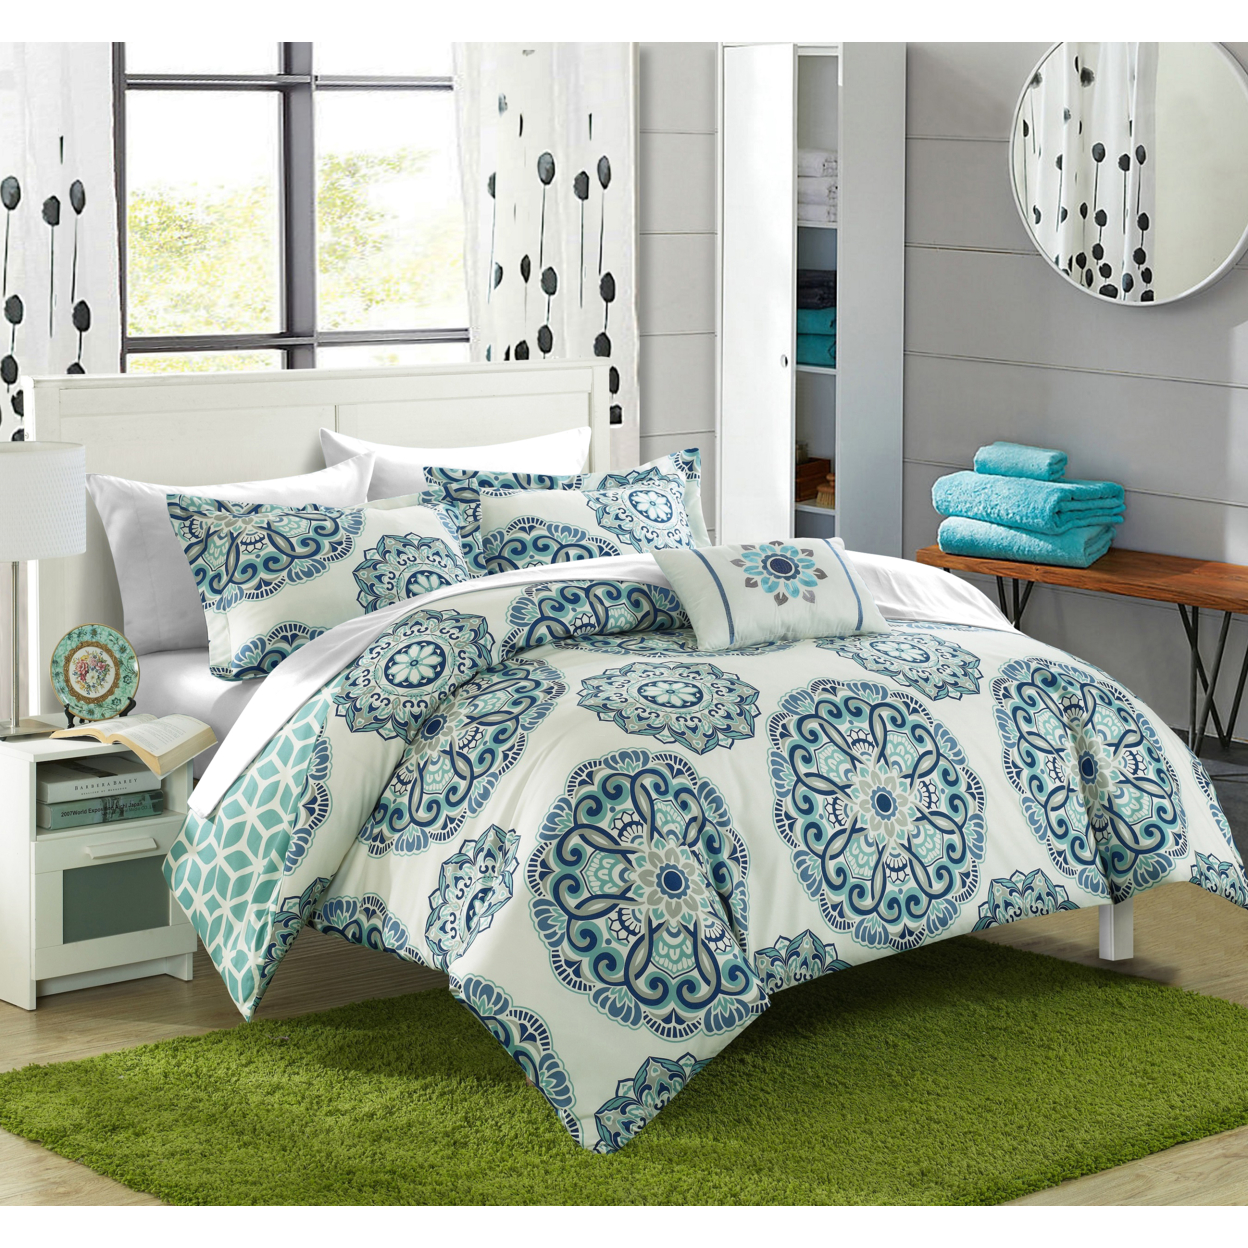 8 Or 6 Pc. Barella Super Soft Large Printed Medallion REVERSIBLE With Geometric Printed Backing Comforter Set - Green, Twin